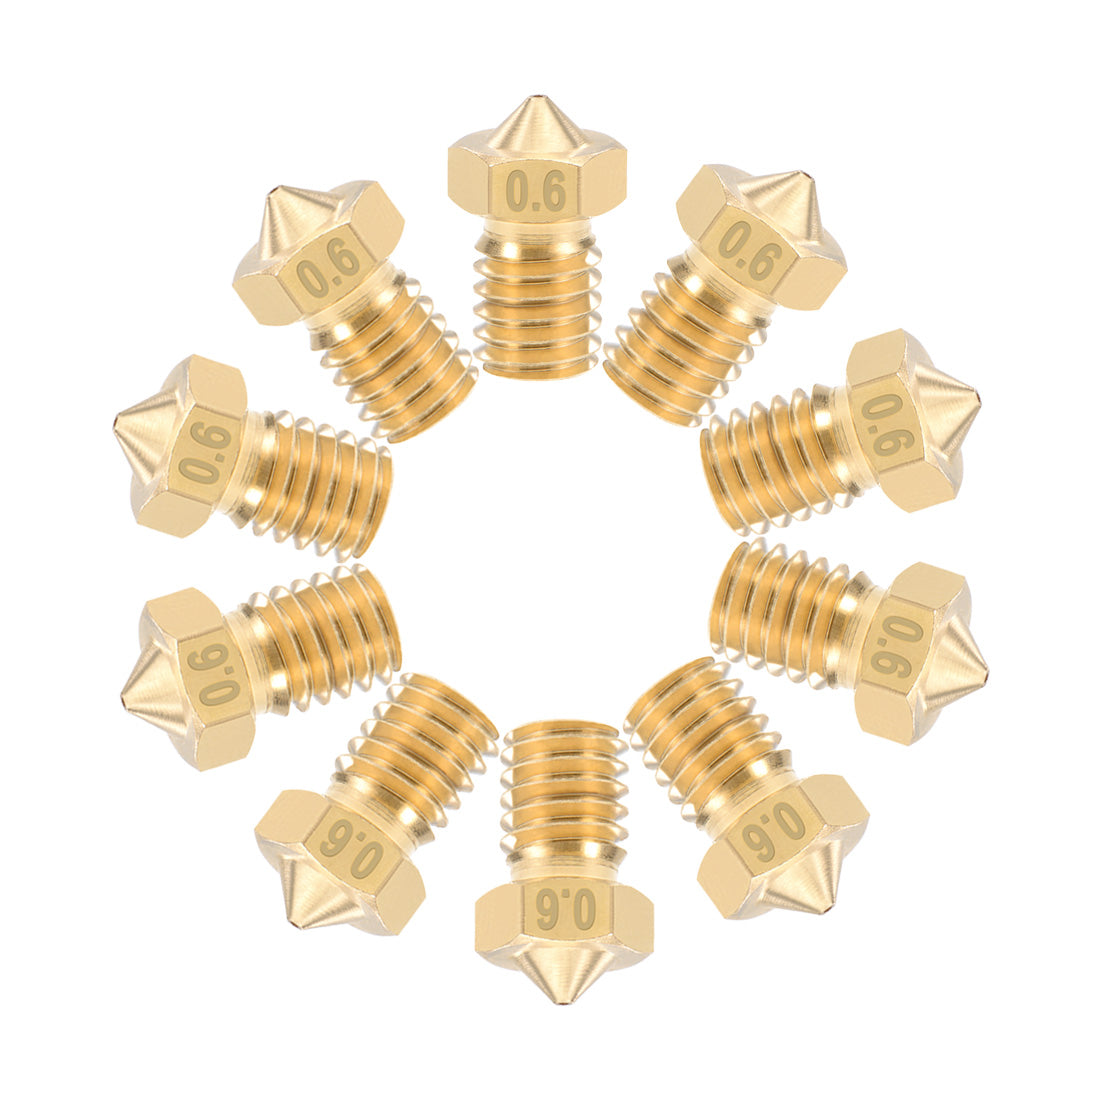 uxcell Uxcell 0.6mm 3D Printer Nozzle Head M6 for V5 V6 1.75mm Extruder Print, Brass 10pcs